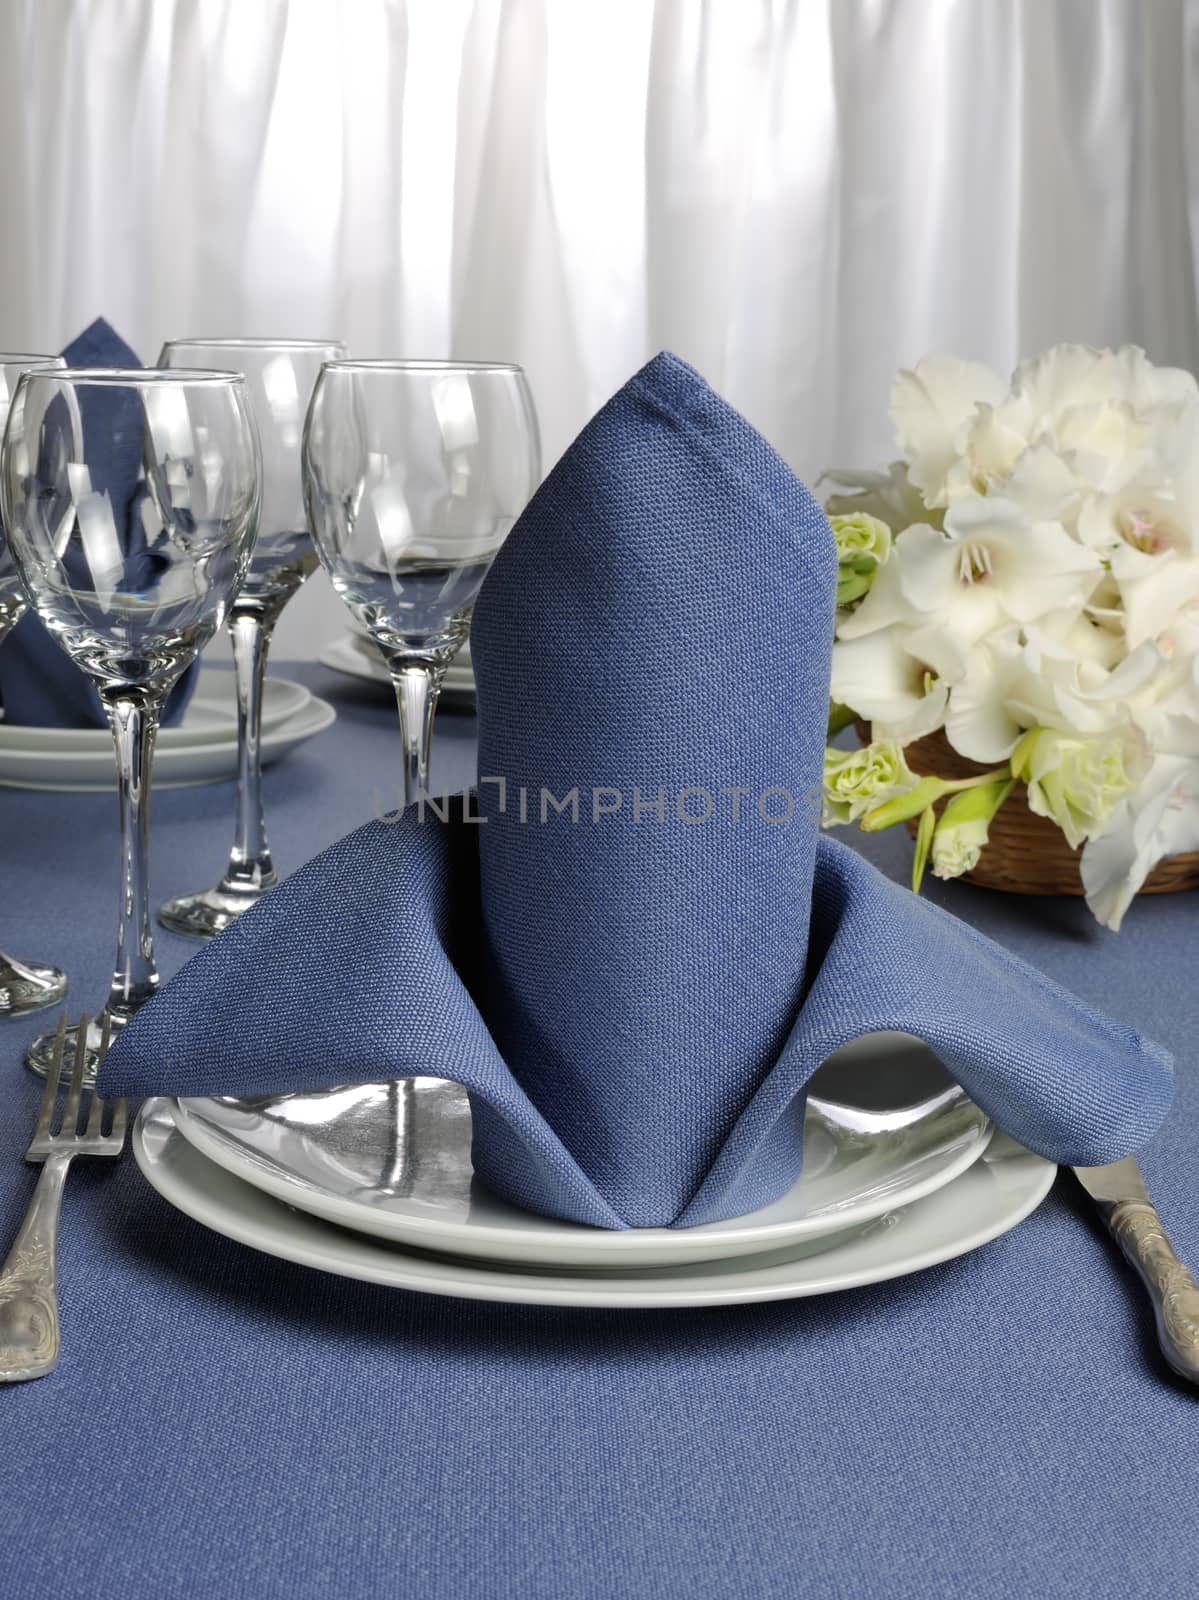 Napkin decorated with flower by Apolonia